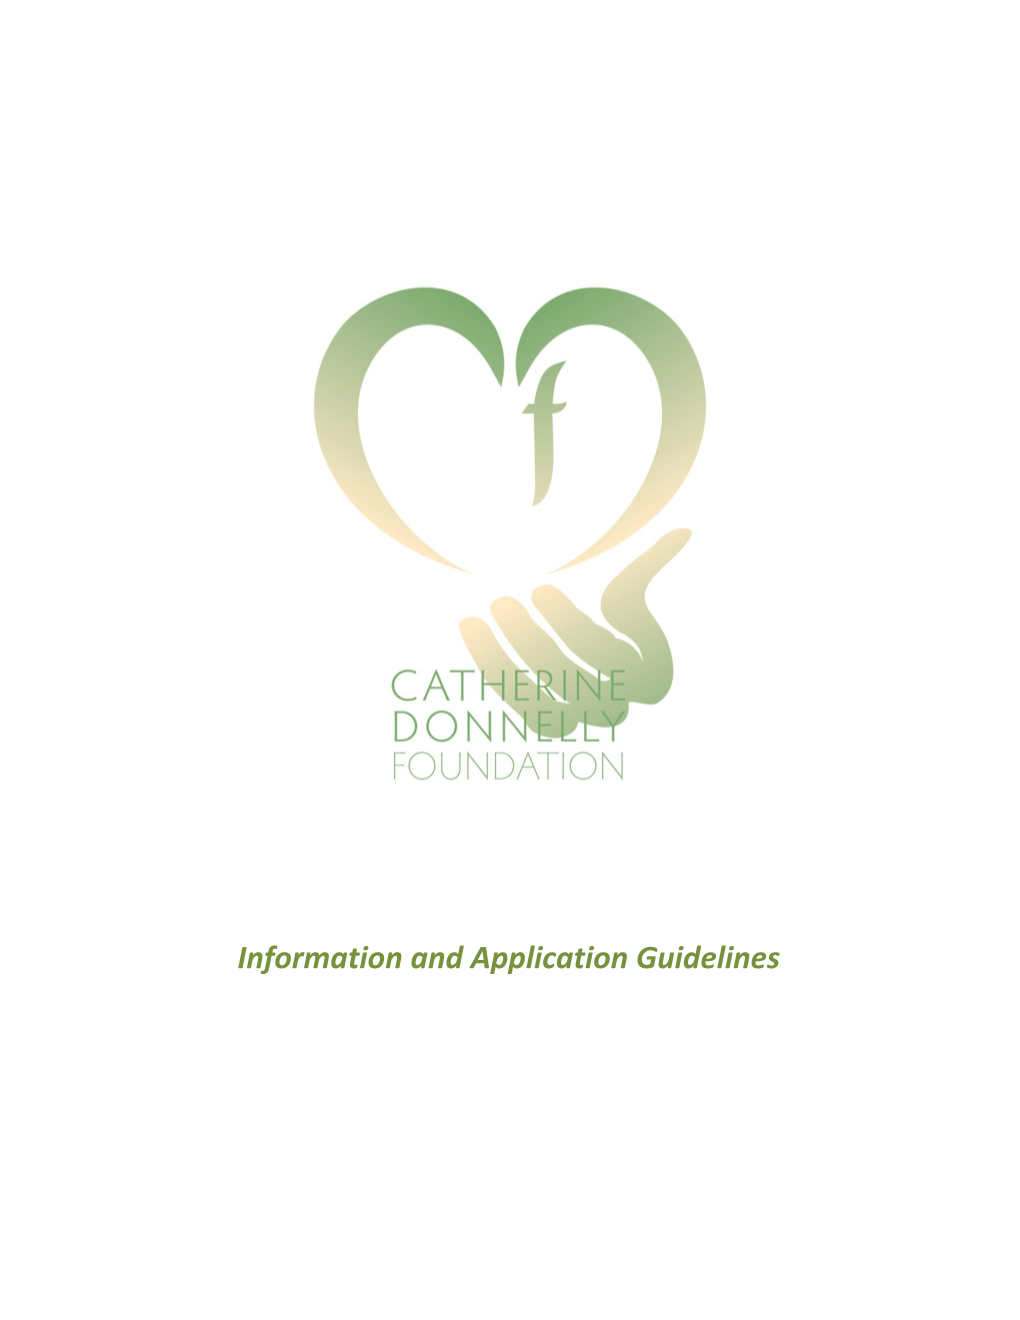 The Catherine Donnelly Foundation